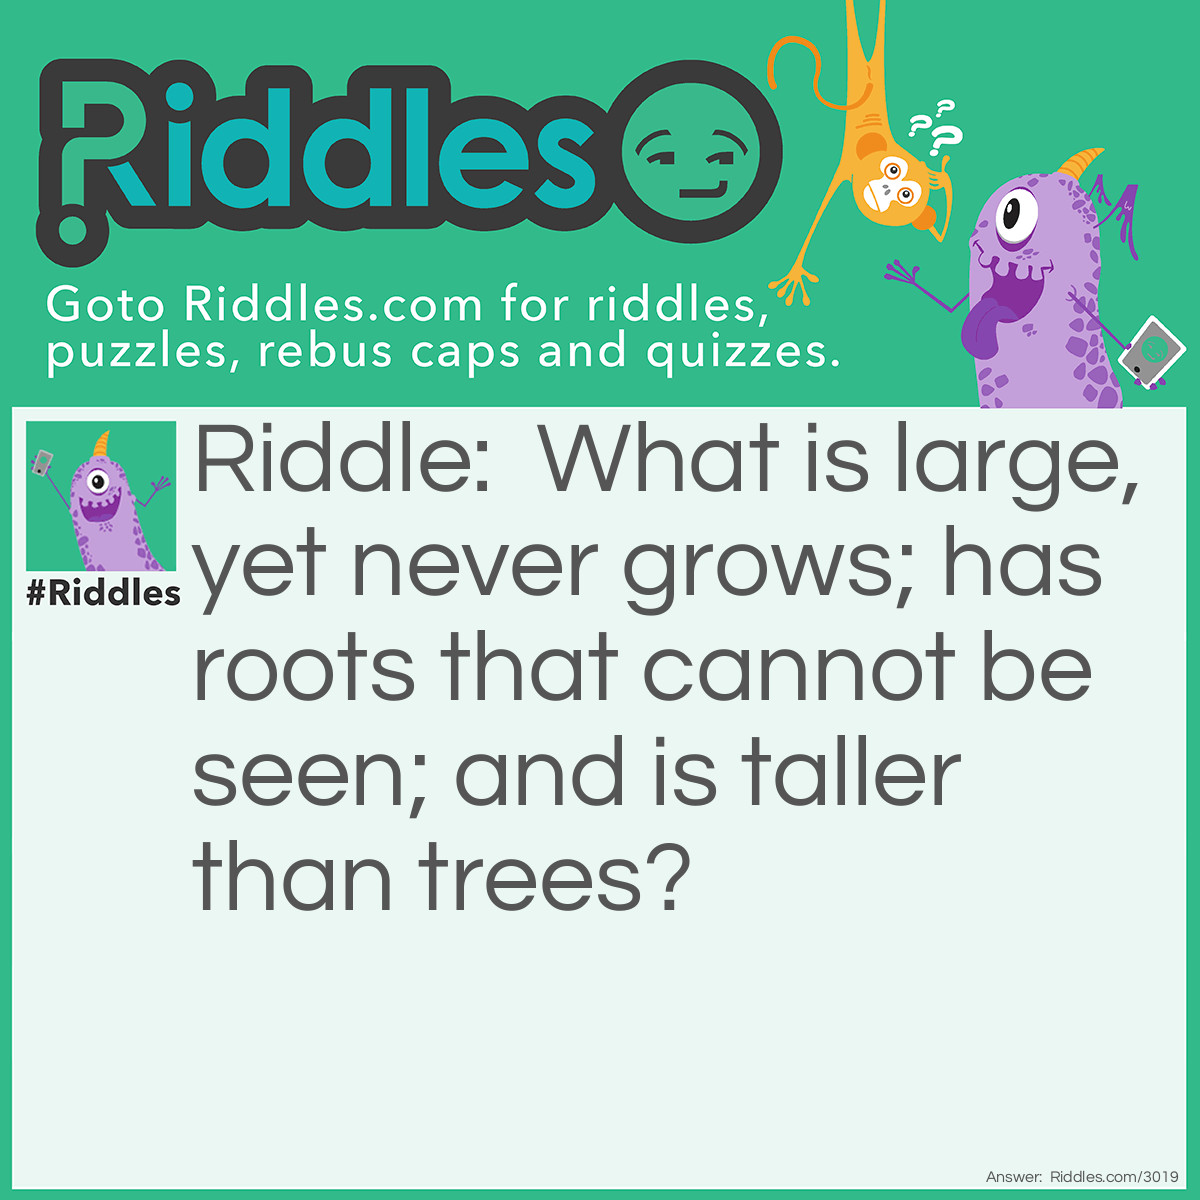 Riddle: What is large, yet never grows; has roots that cannot be seen; and is taller than trees? Answer: A mountain.